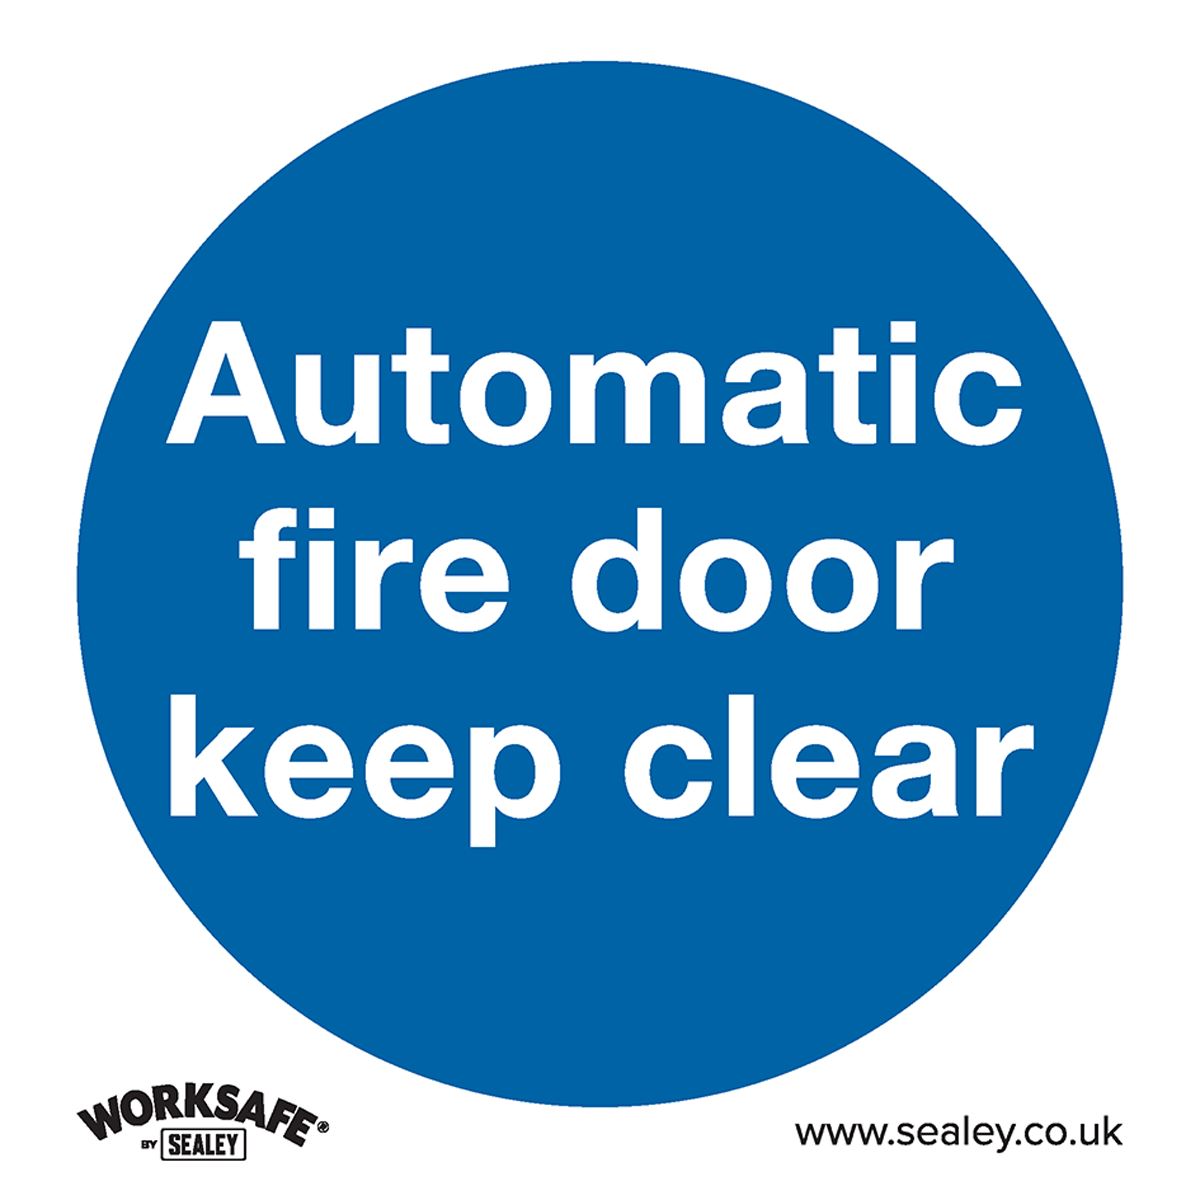 Worksafe by Sealey Mandatory Safety Sign - Automatic Fire Door Keep Clear - Self-Adhesive Vinyl - Pack of 10